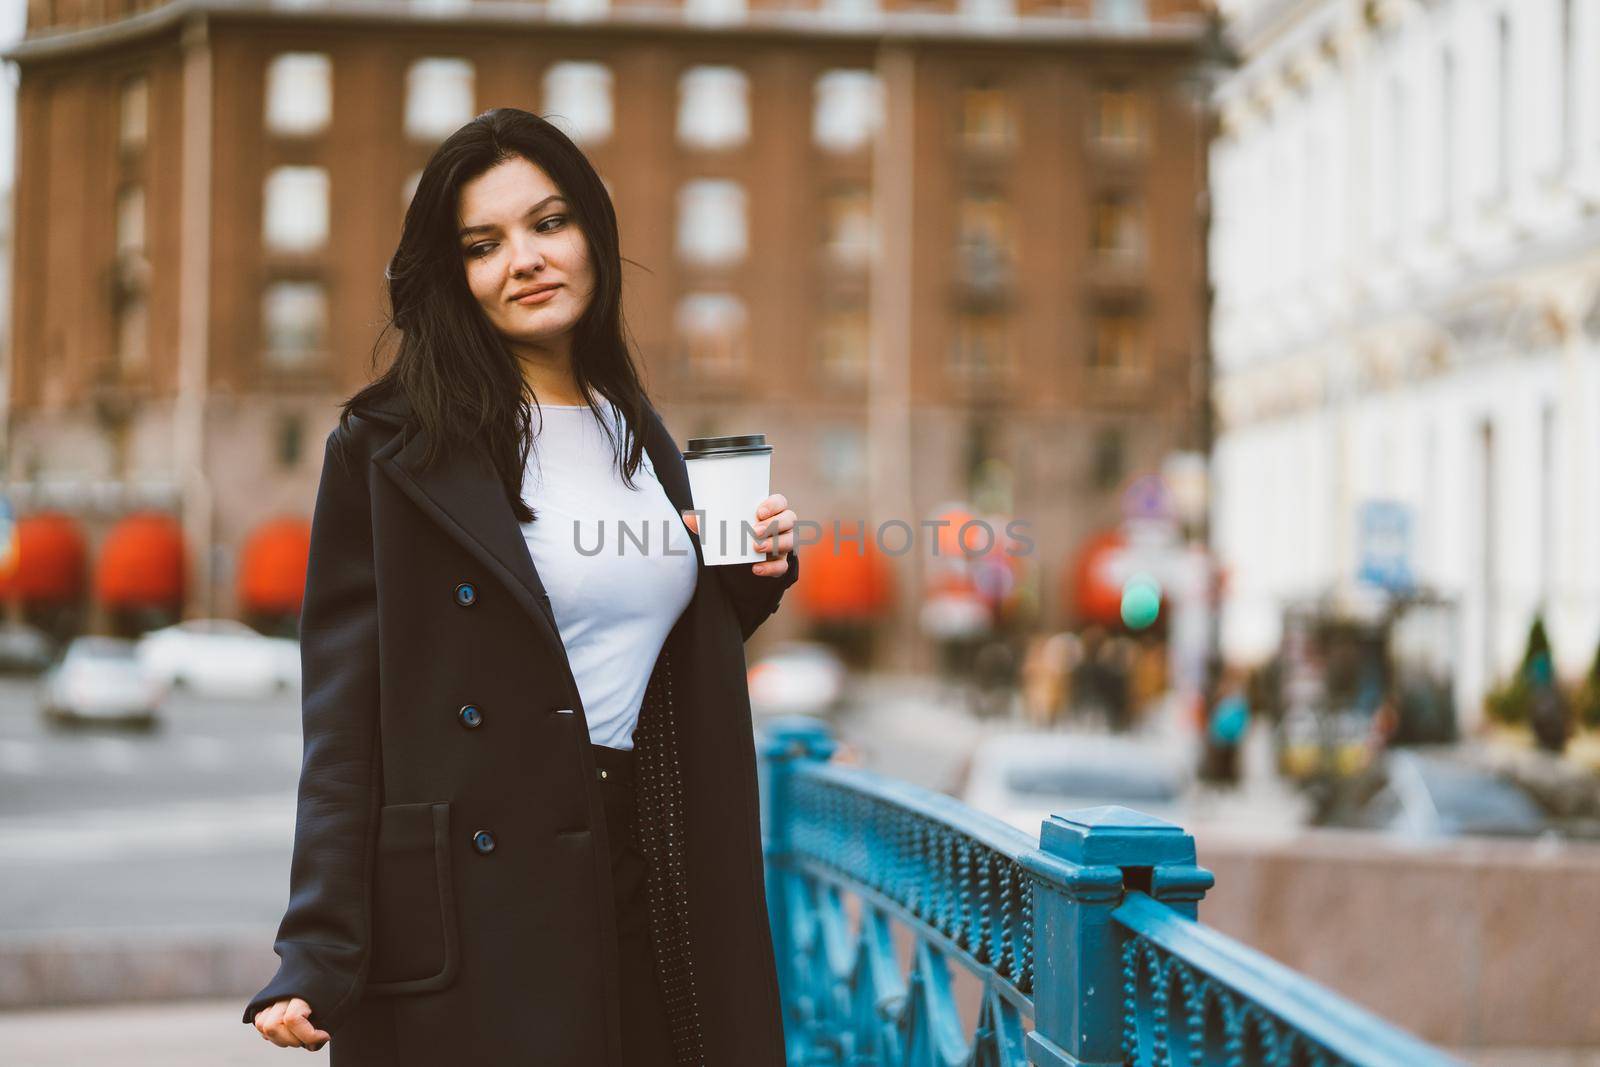 Beautiful serious smart brunette girl holding cup of coffee in hands goes walking down street in a enter on blue bridge. Charming thoughtful woman with long hair wanders alone, immersed in thoughts